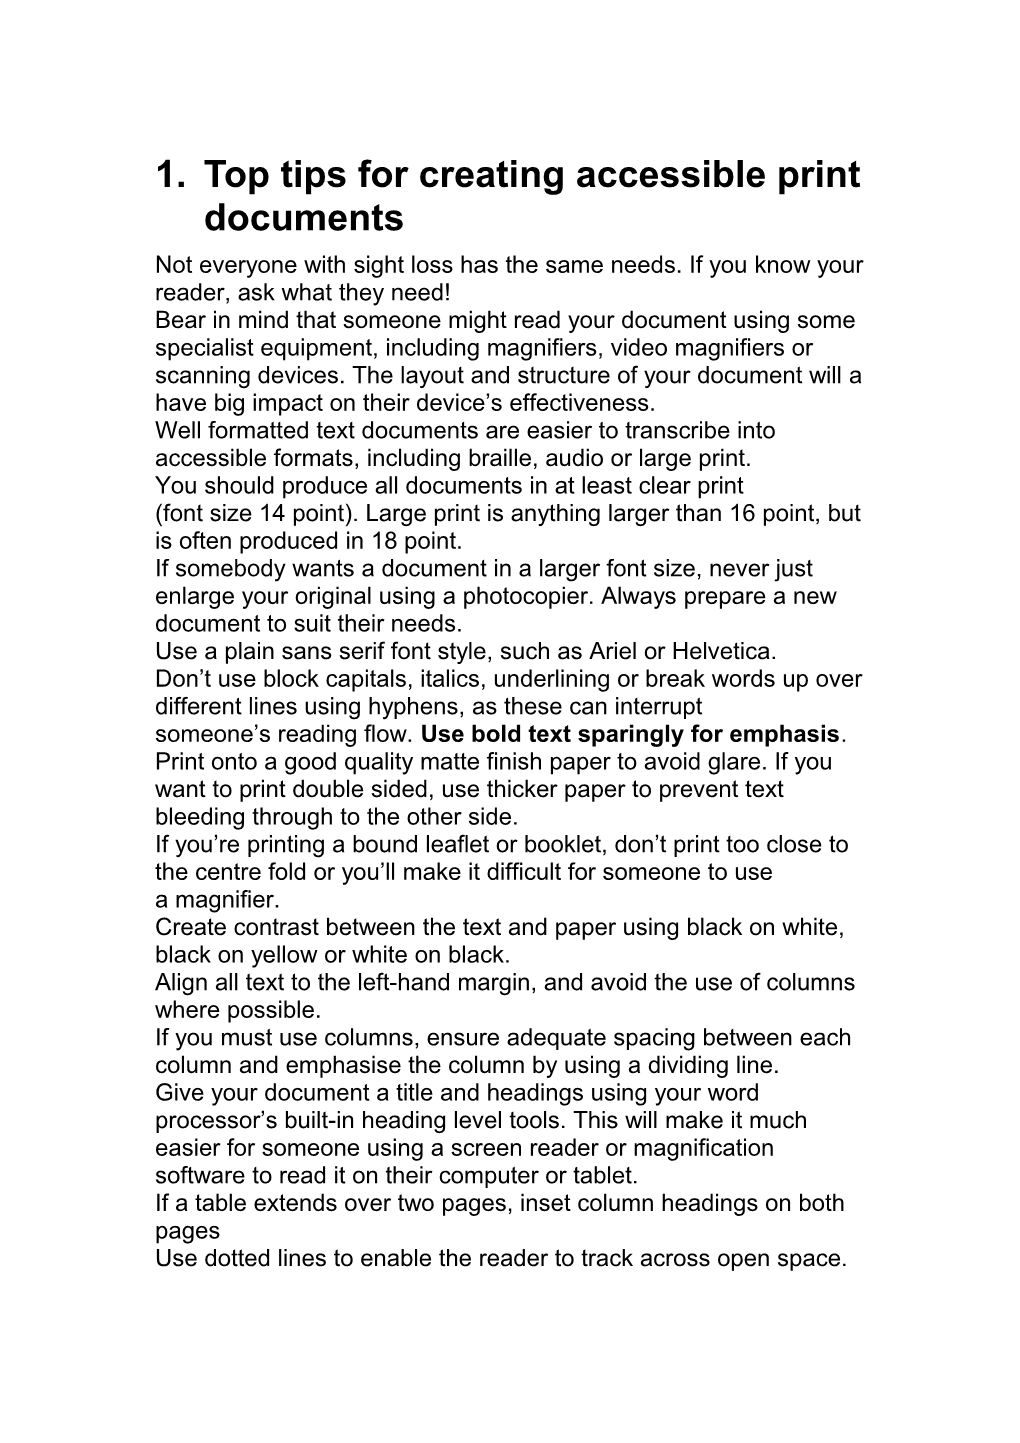 Top Tips for Creating Accessible Print Documents